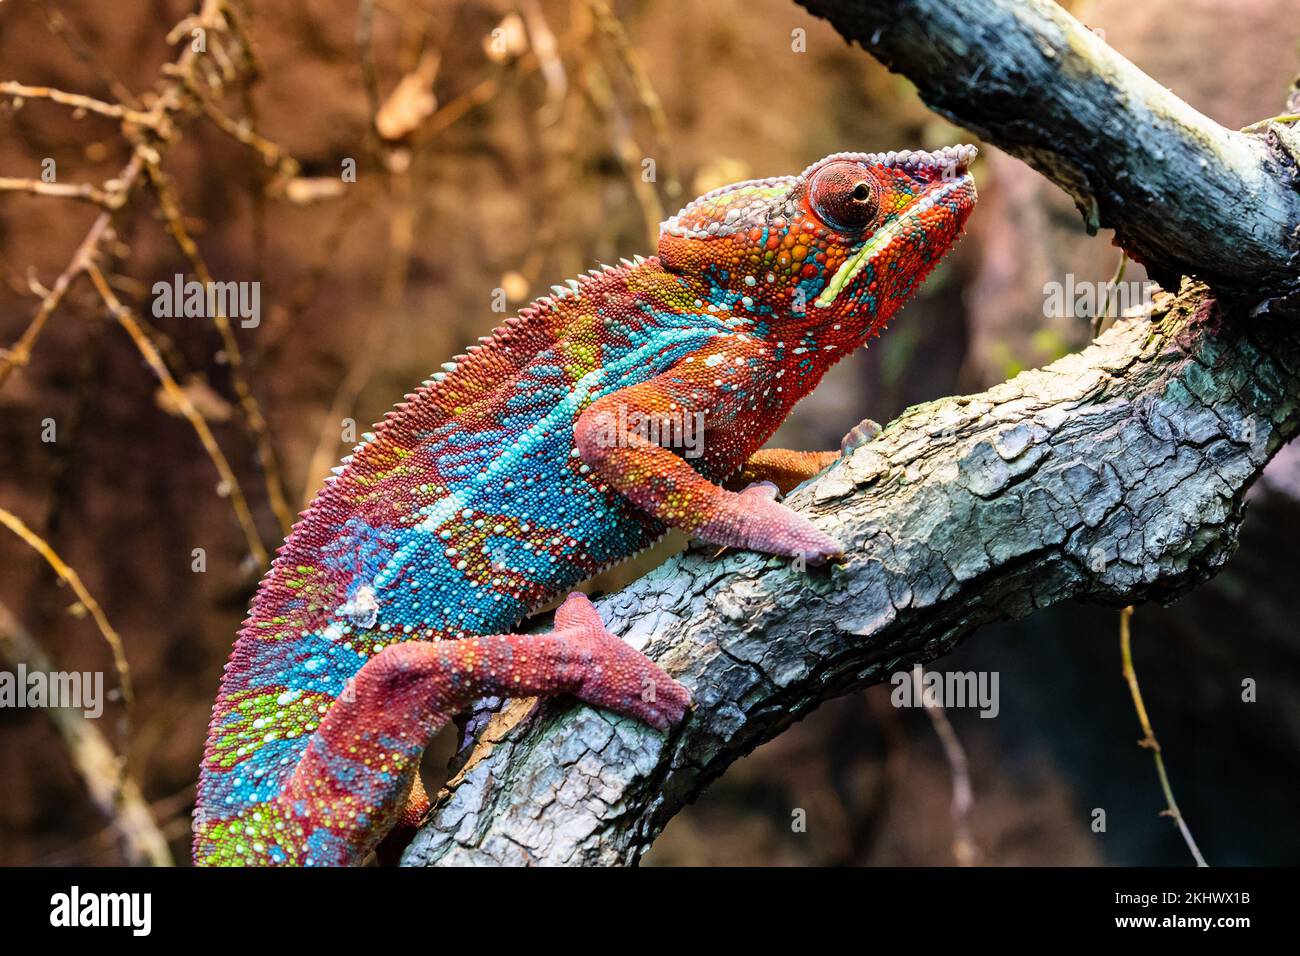 Reunion chameleon. Reptile and reptiles. Amphibian and Amphibians. Tropical fauna. Wildlife and zoology. Nature and animal photography. Stock Photo